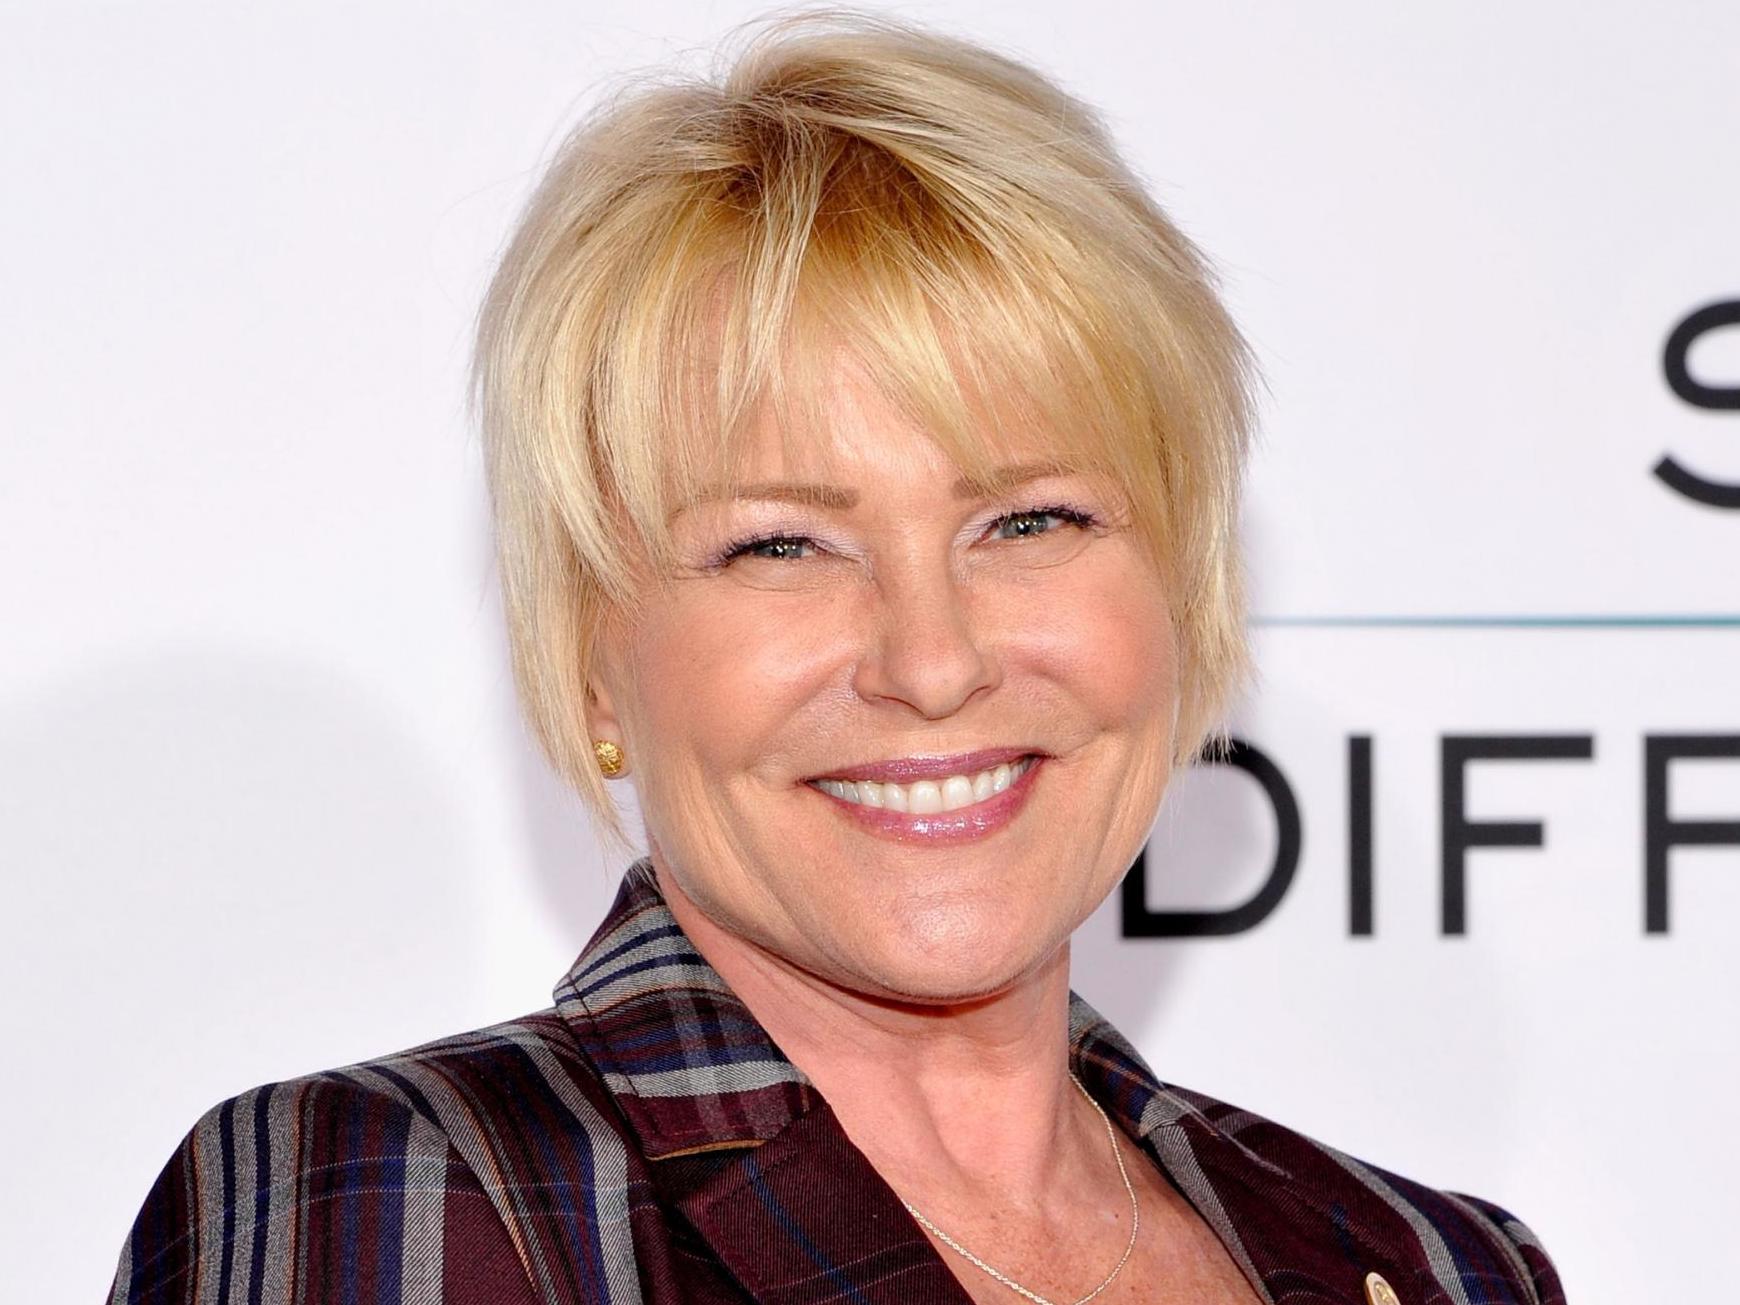 Days of Our Lives star Judi Evans 'nearly had both legs amputated' after contracting coronavirus